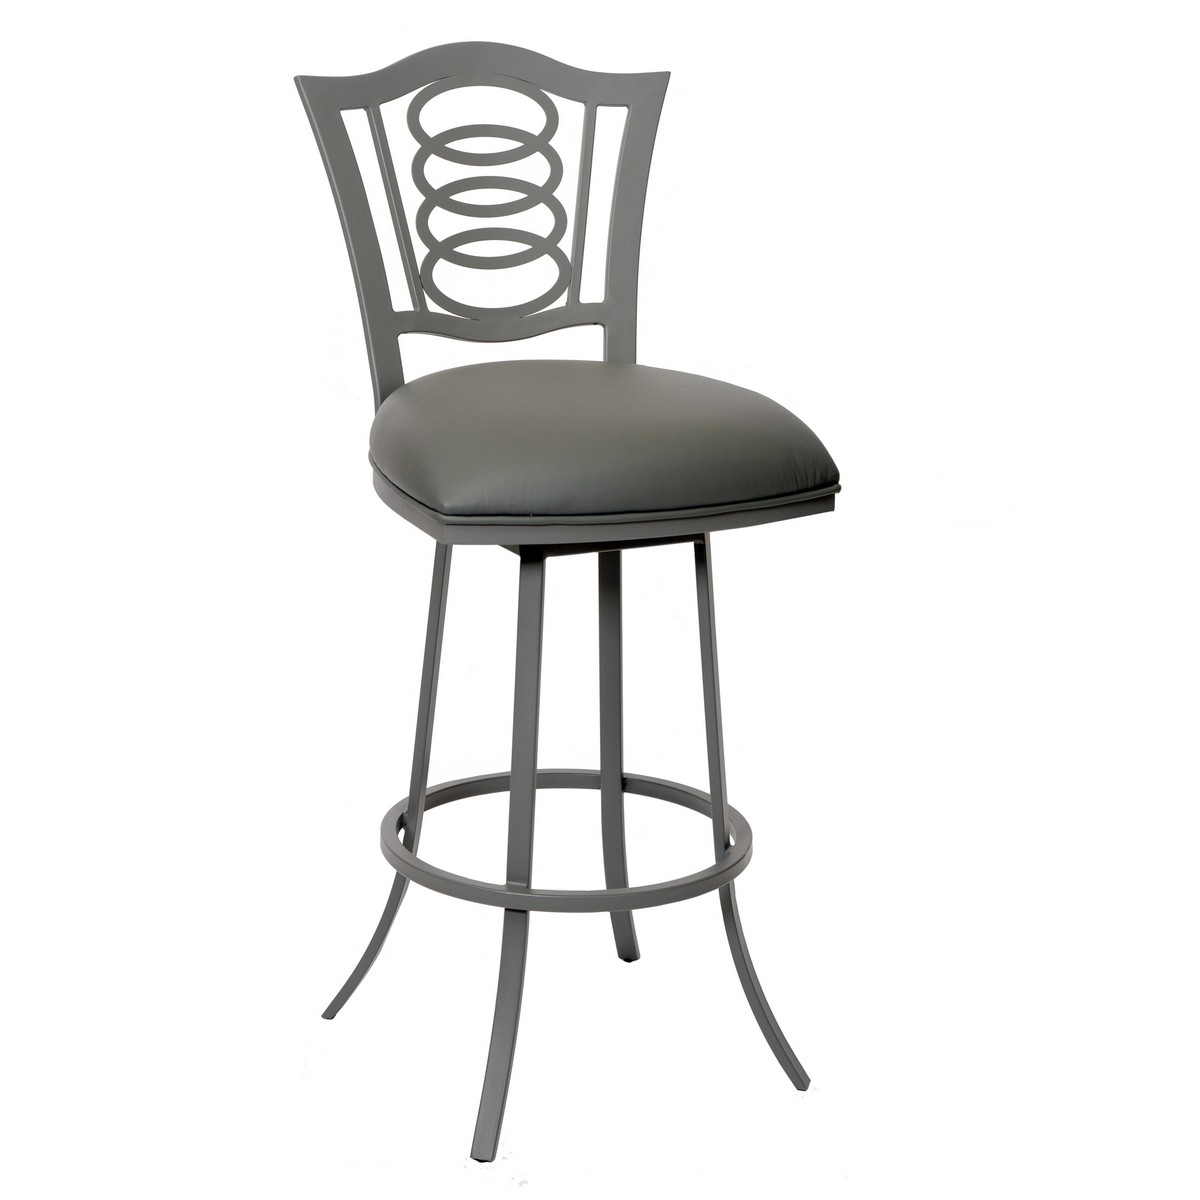 Armen Living Essex 26-inch Transitional Barstool In Gray and Gray Metal